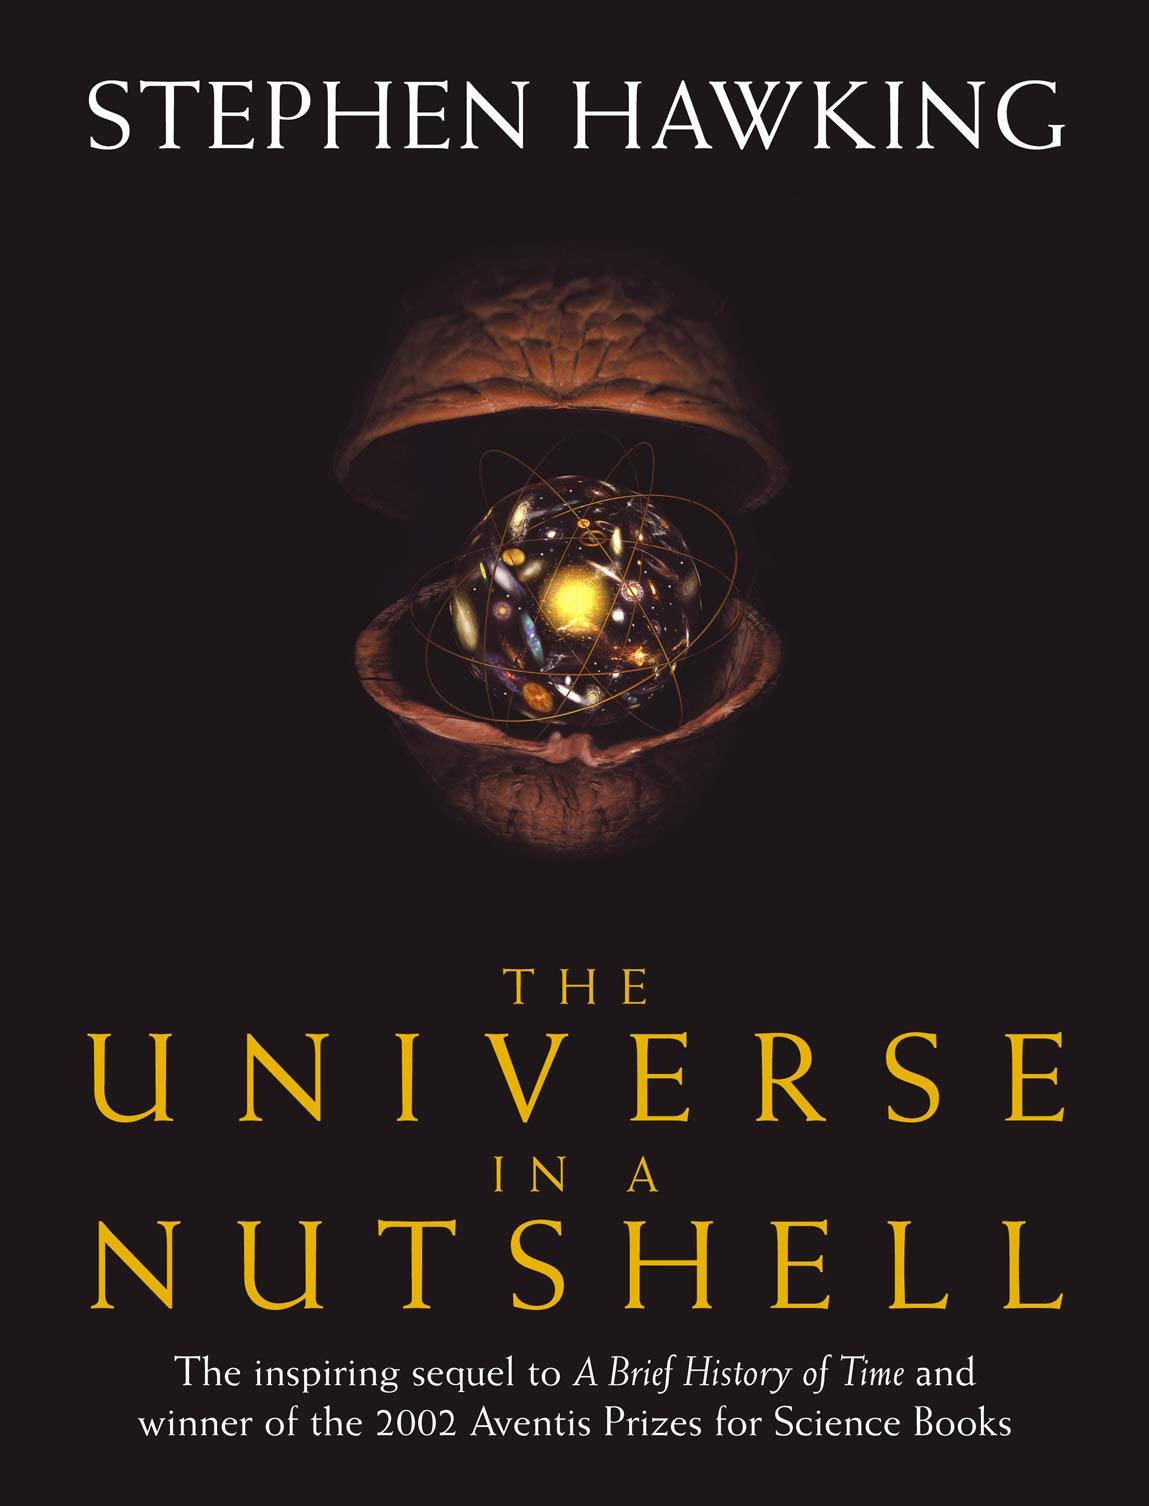 The Universe in a Nutshell by Stephen Hawking (হার্ডকভার)